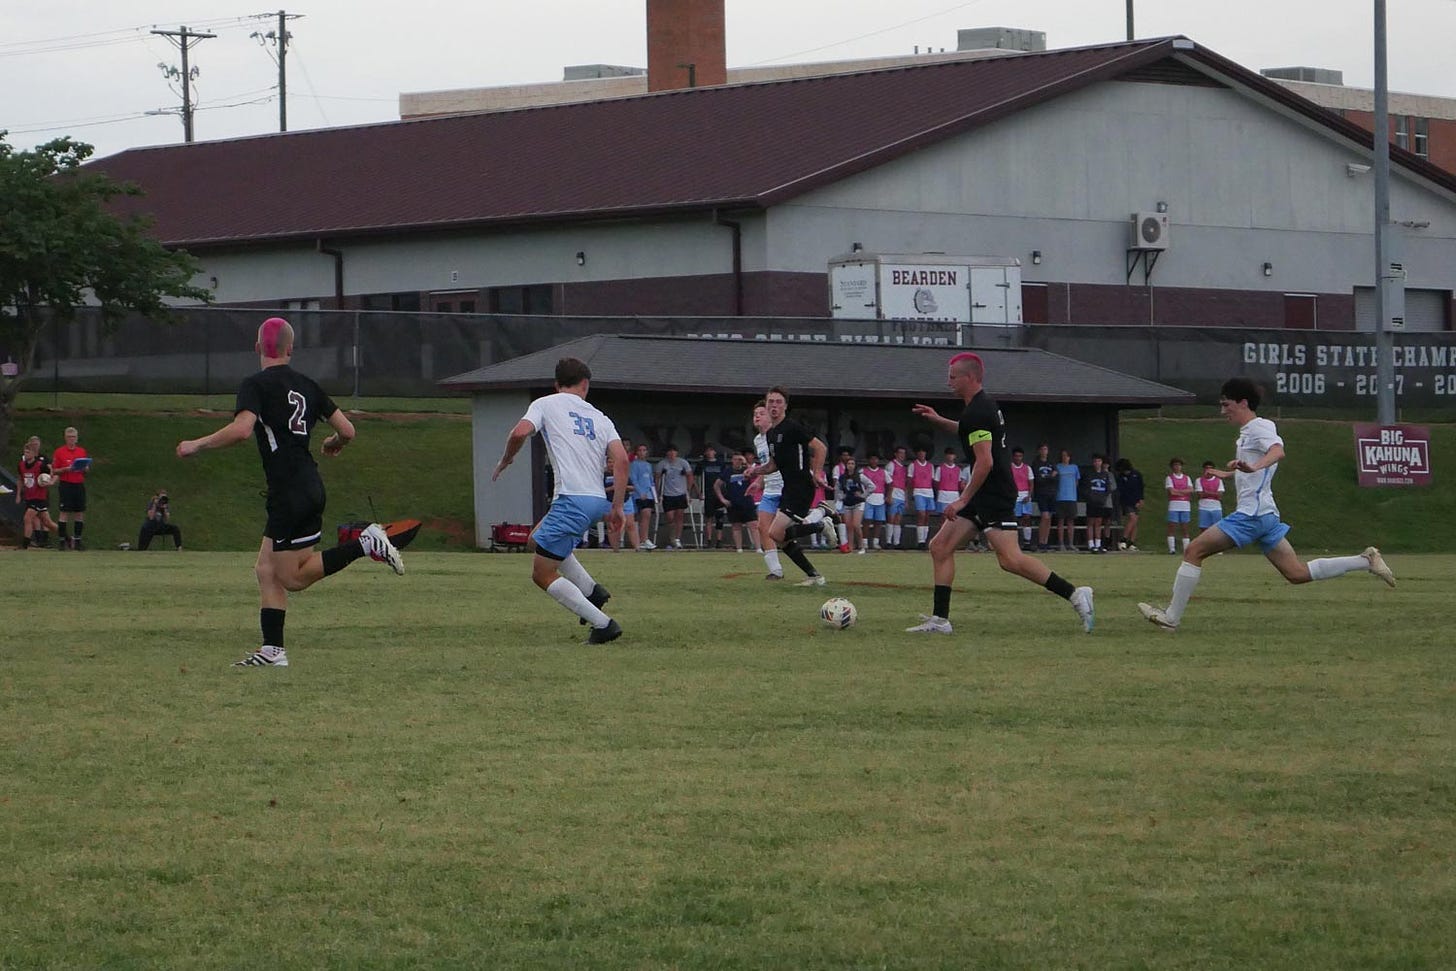 Bearden and Hardin Valley Academy boys soccer players compete for a ball.